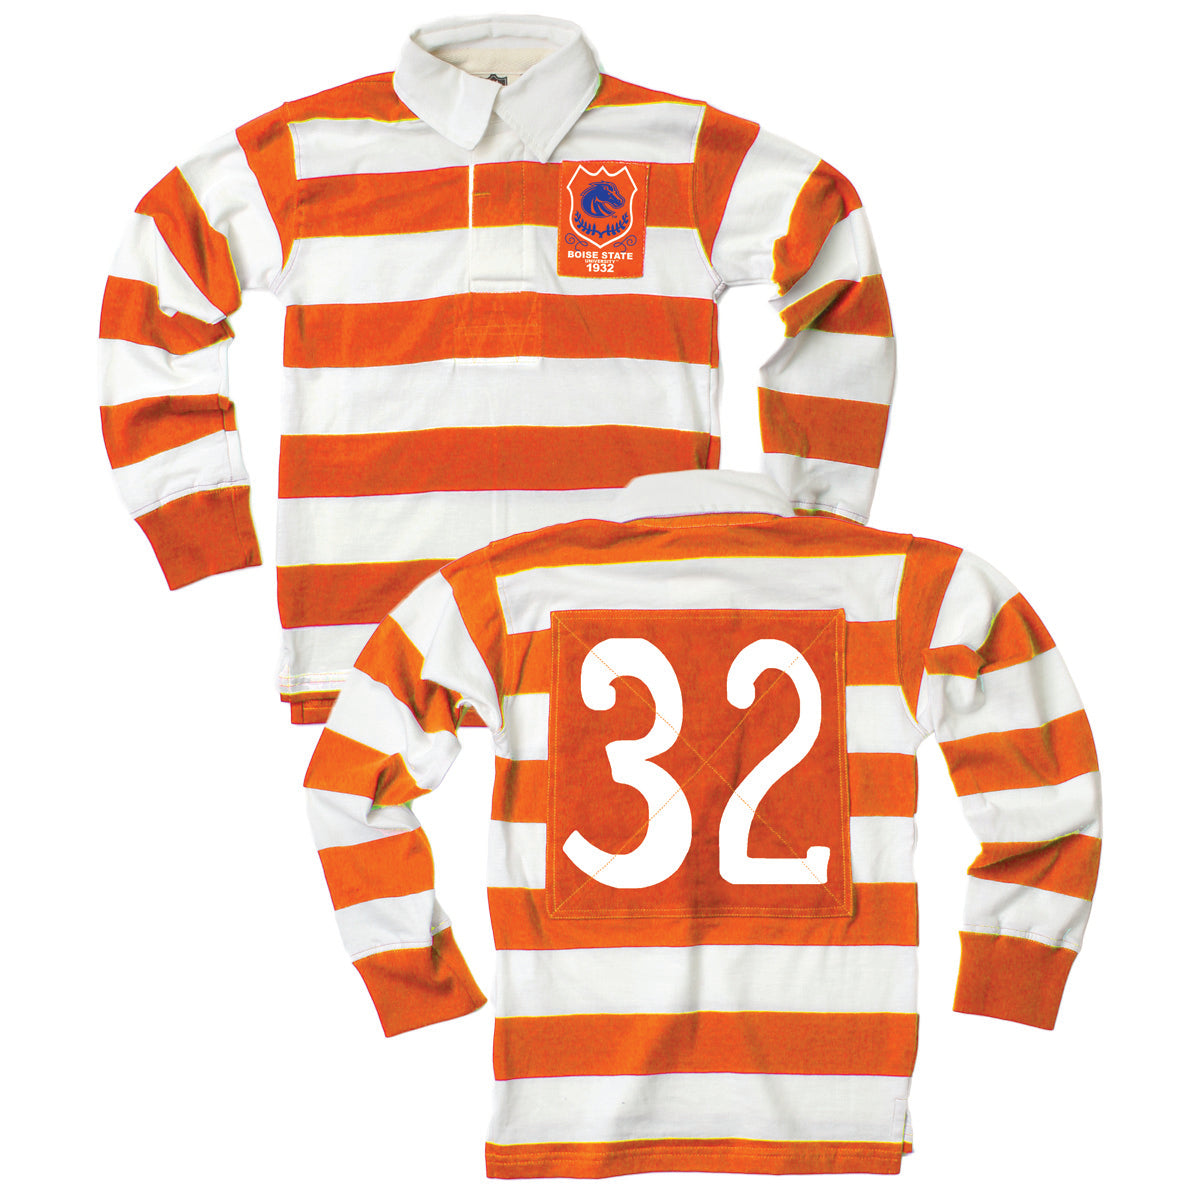 Boise State Bronco's Youth Boys Rugby Shirt-Orange